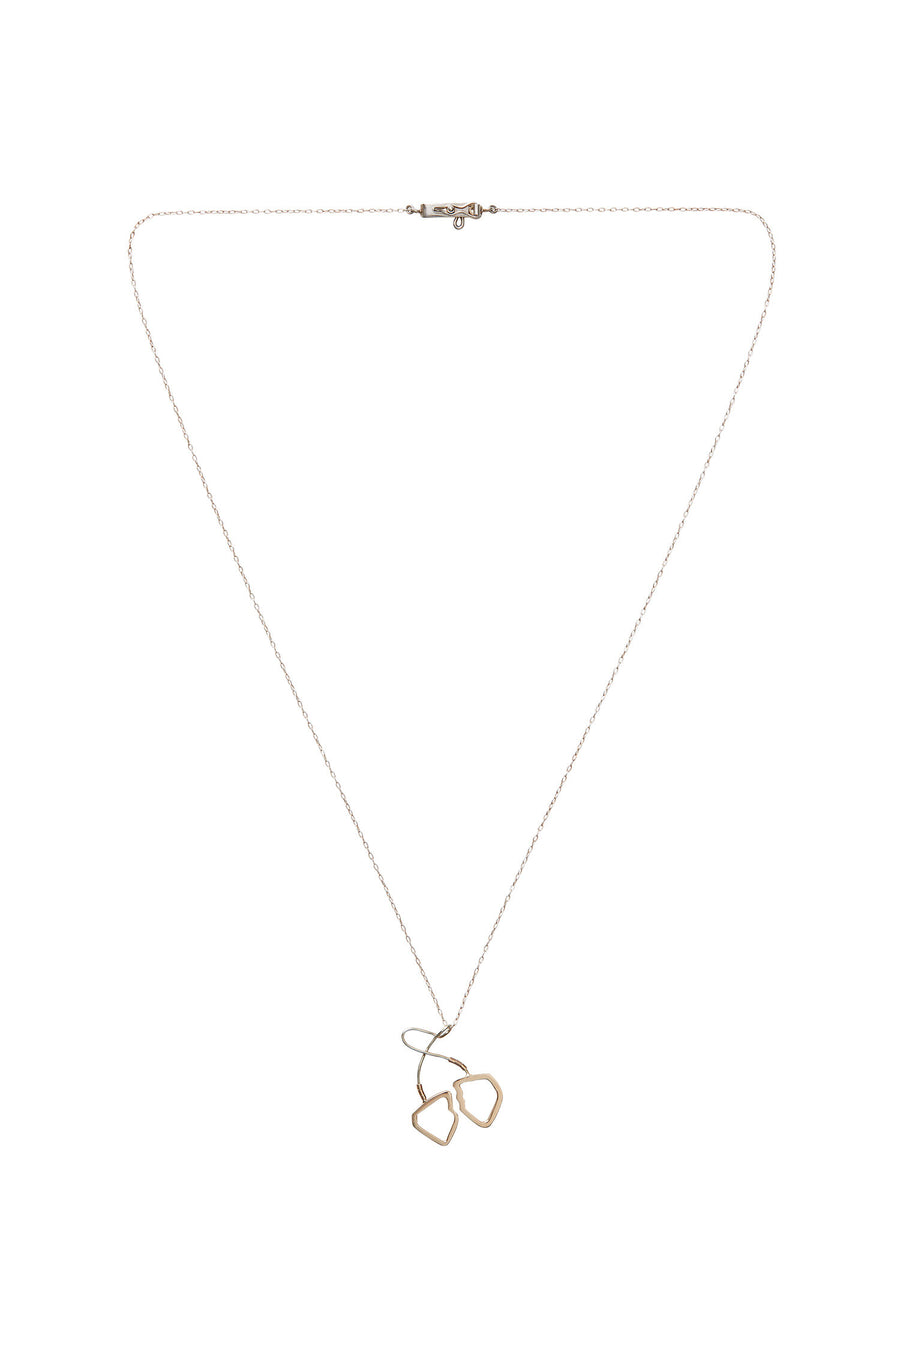 Entwined Lovers Necklace - Venice Jewellery